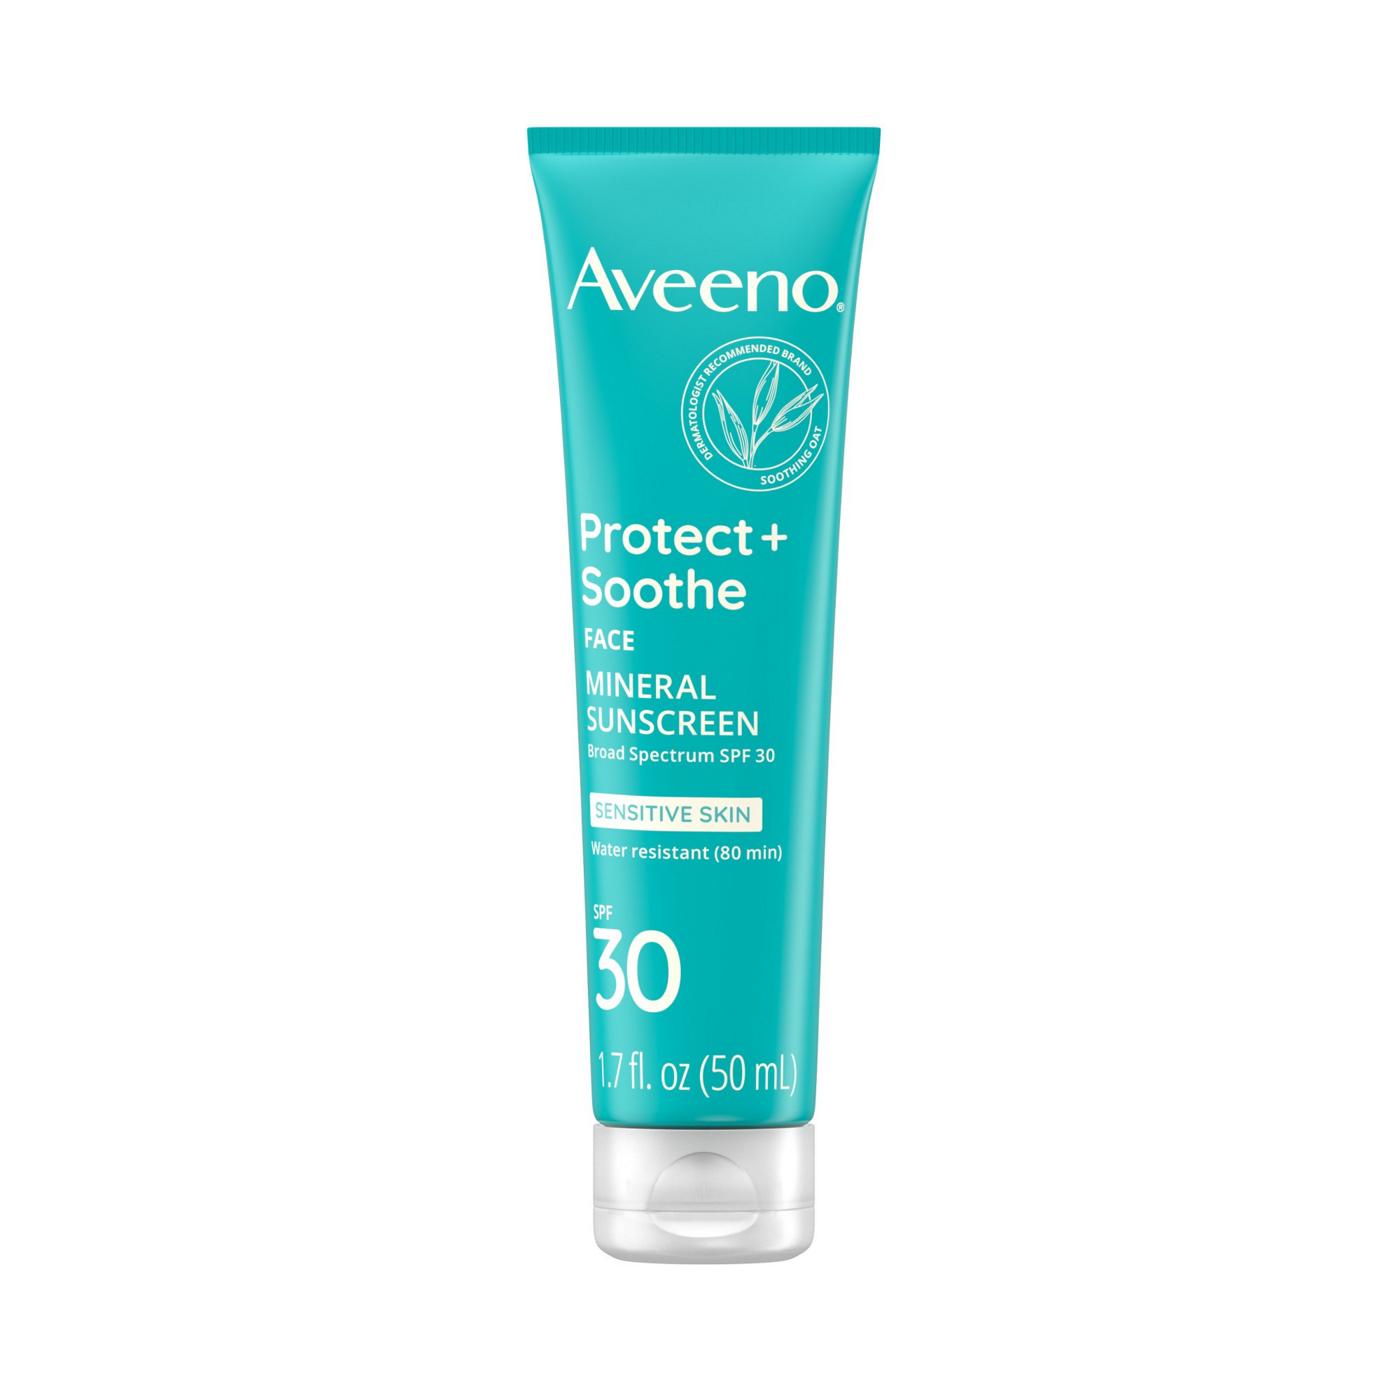 Aveeno Protect + Soothe Face Mineral Sunscreen SPF 30; image 5 of 9